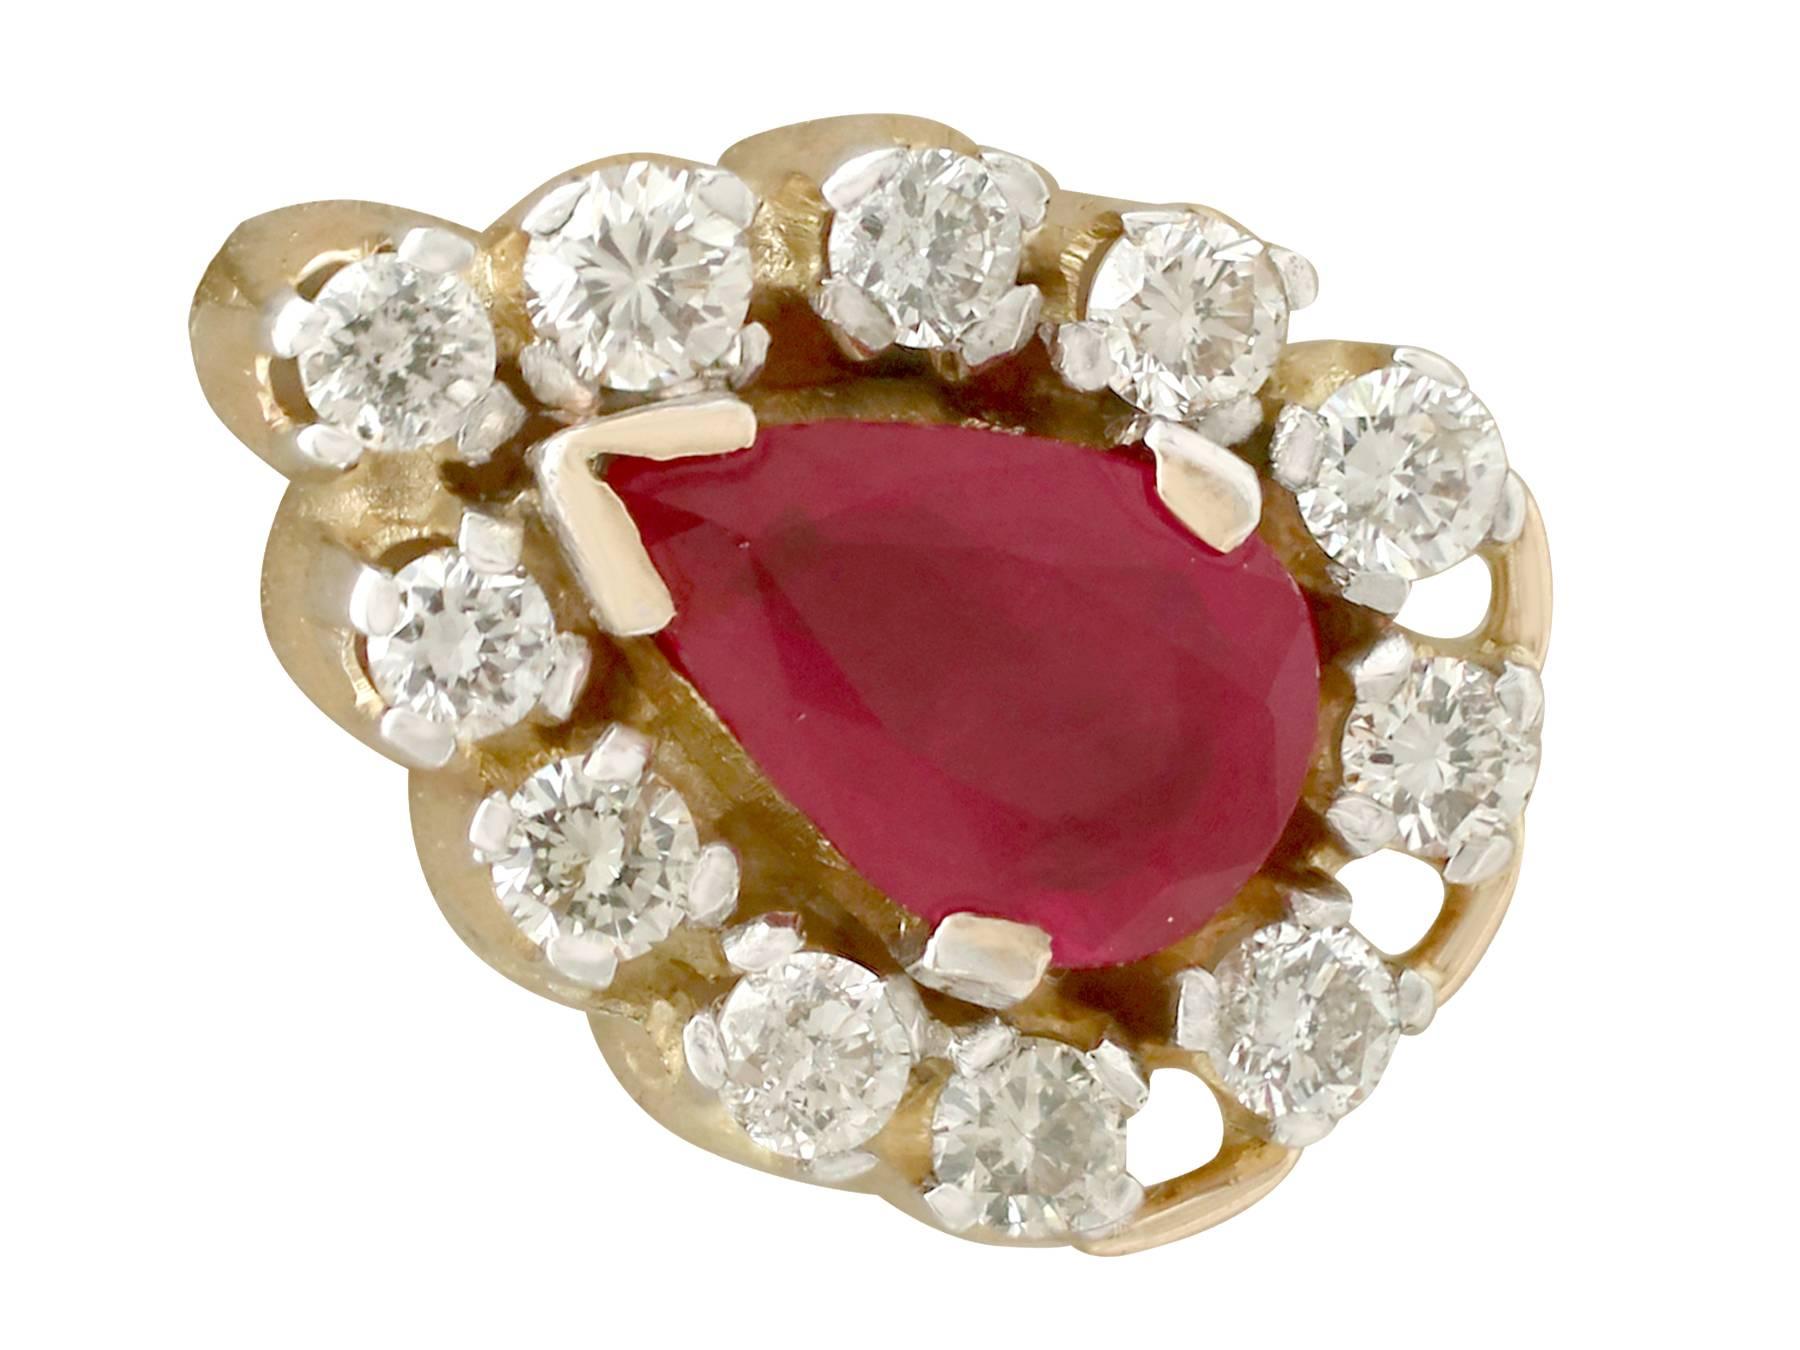 A fine pair of 1.20 carat ruby and 0.48 carat diamond, 18 karat yellow gold and 18 karat white gold set cluster earrings; part of our diverse jewelry collections

These fine and impressive ruby cluster earrings have been crafted in 18 k yellow gold